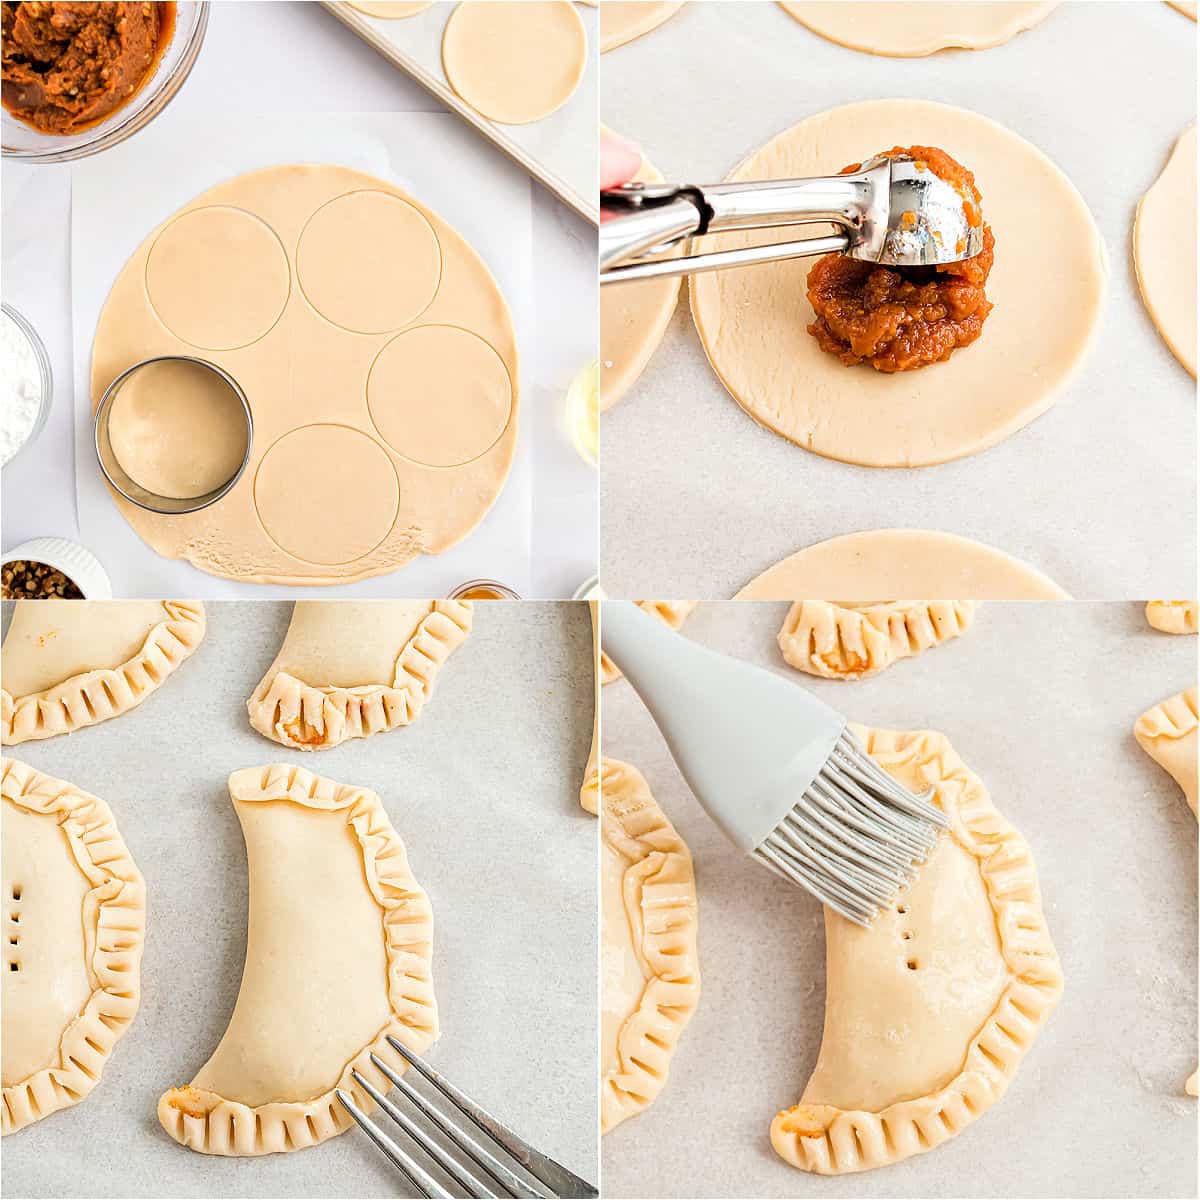 Step by step photos showing how to assemble pumpkin hand pies.